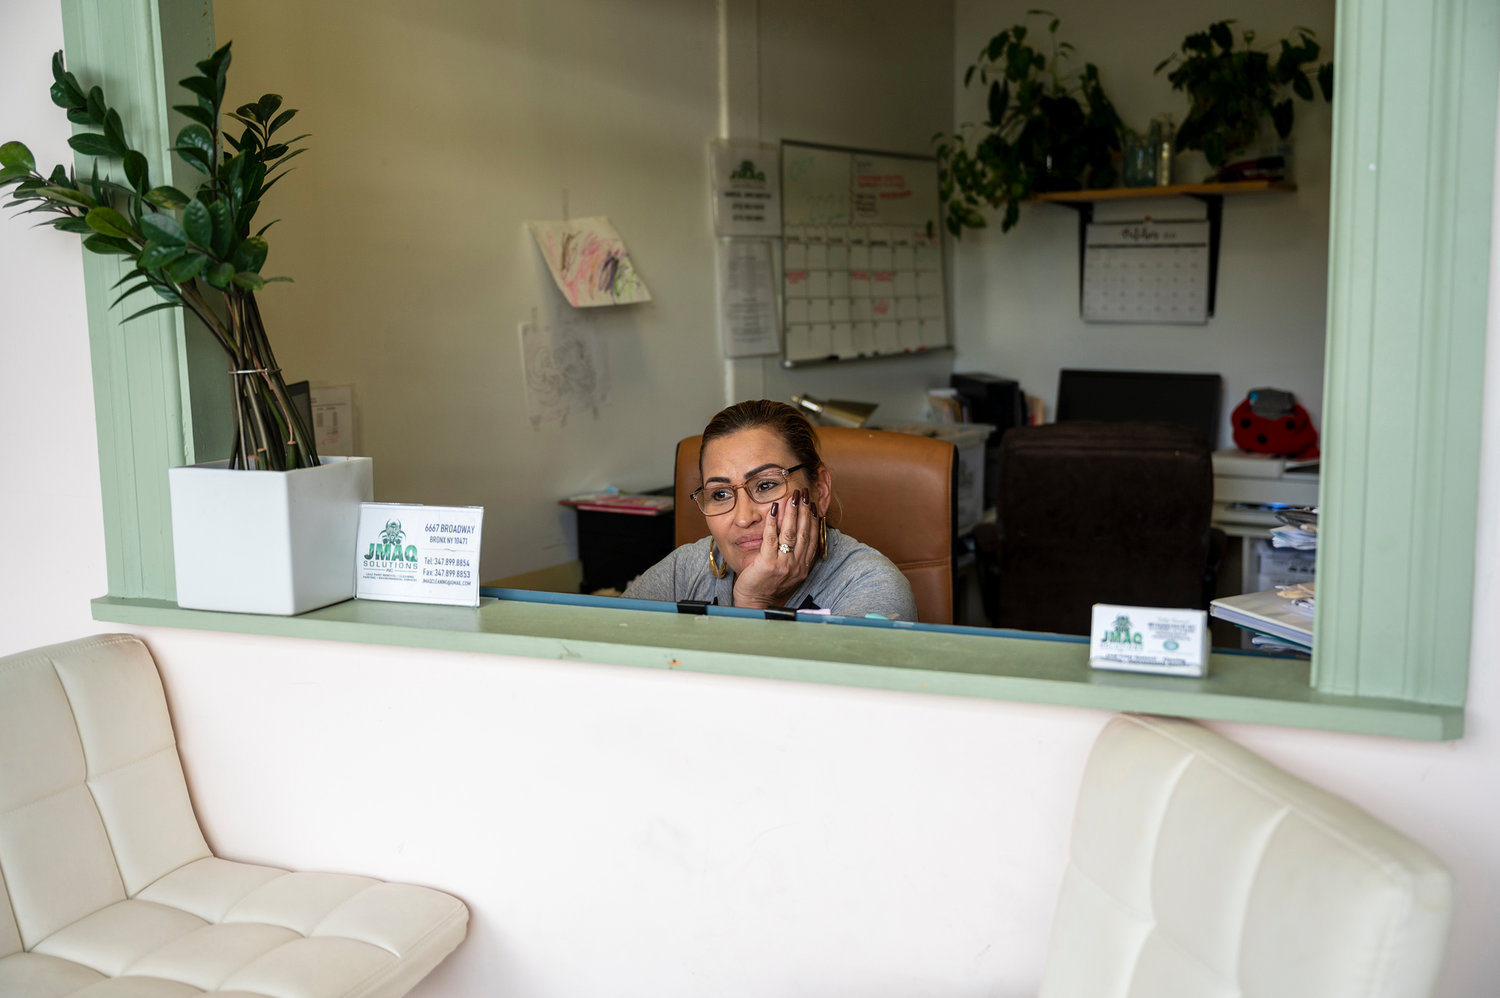 Jackie Maquilon helps her family at the front desk of JMaq Cleaning Solutions on Broadway and West 262nd Street. They have been collectively running the business since her ex-husband died last spring. If the city moves forward with its plan to build a men’s homeless shelter at 6661 Broadway, the family would have to part ways with their business location.